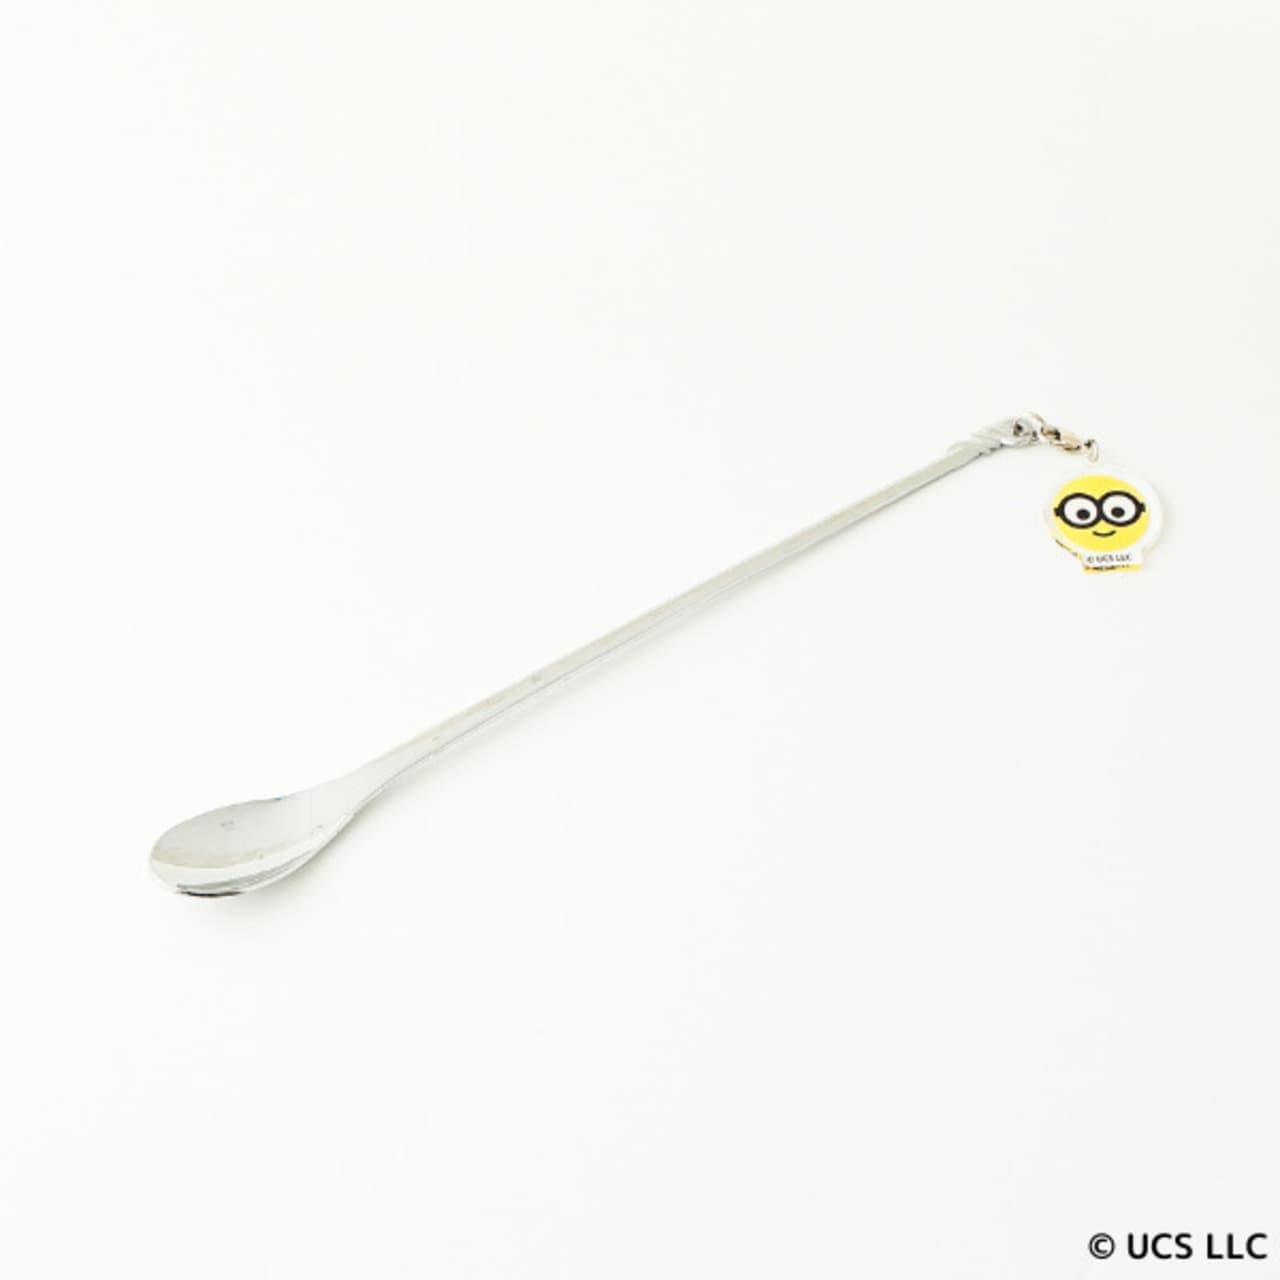 Minion Happy Sweets Shop "Spoon with Original Charm